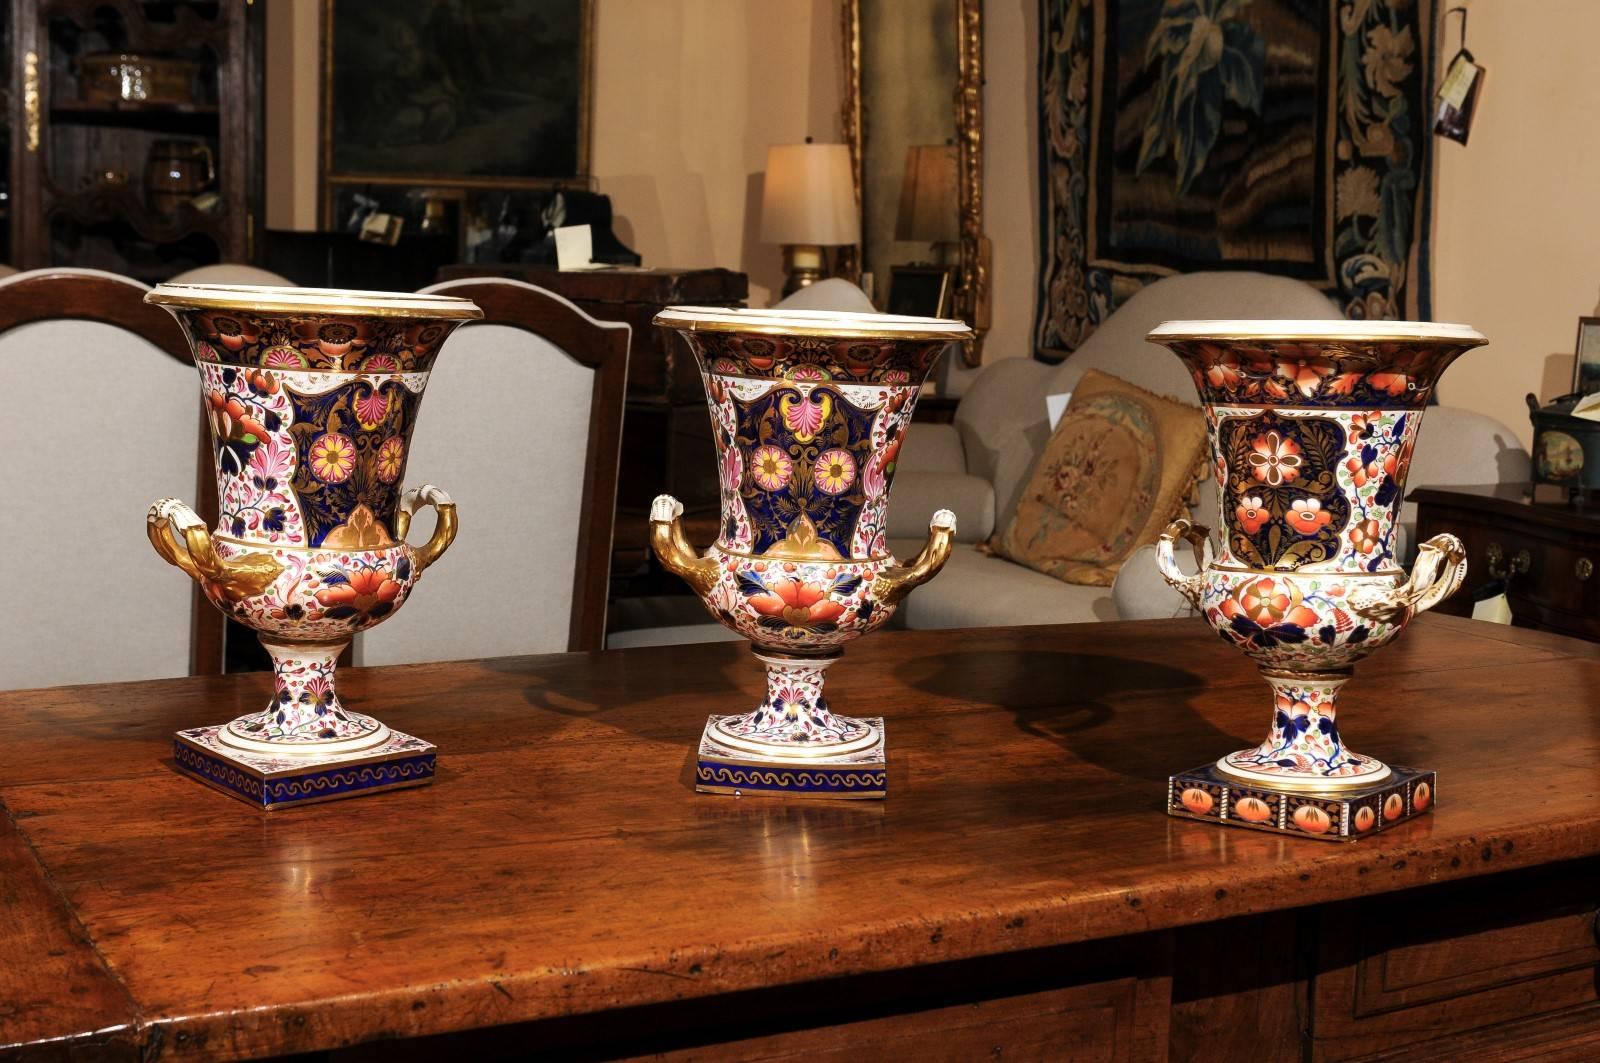 Set of 3 large Derby Urns, England 19th century.